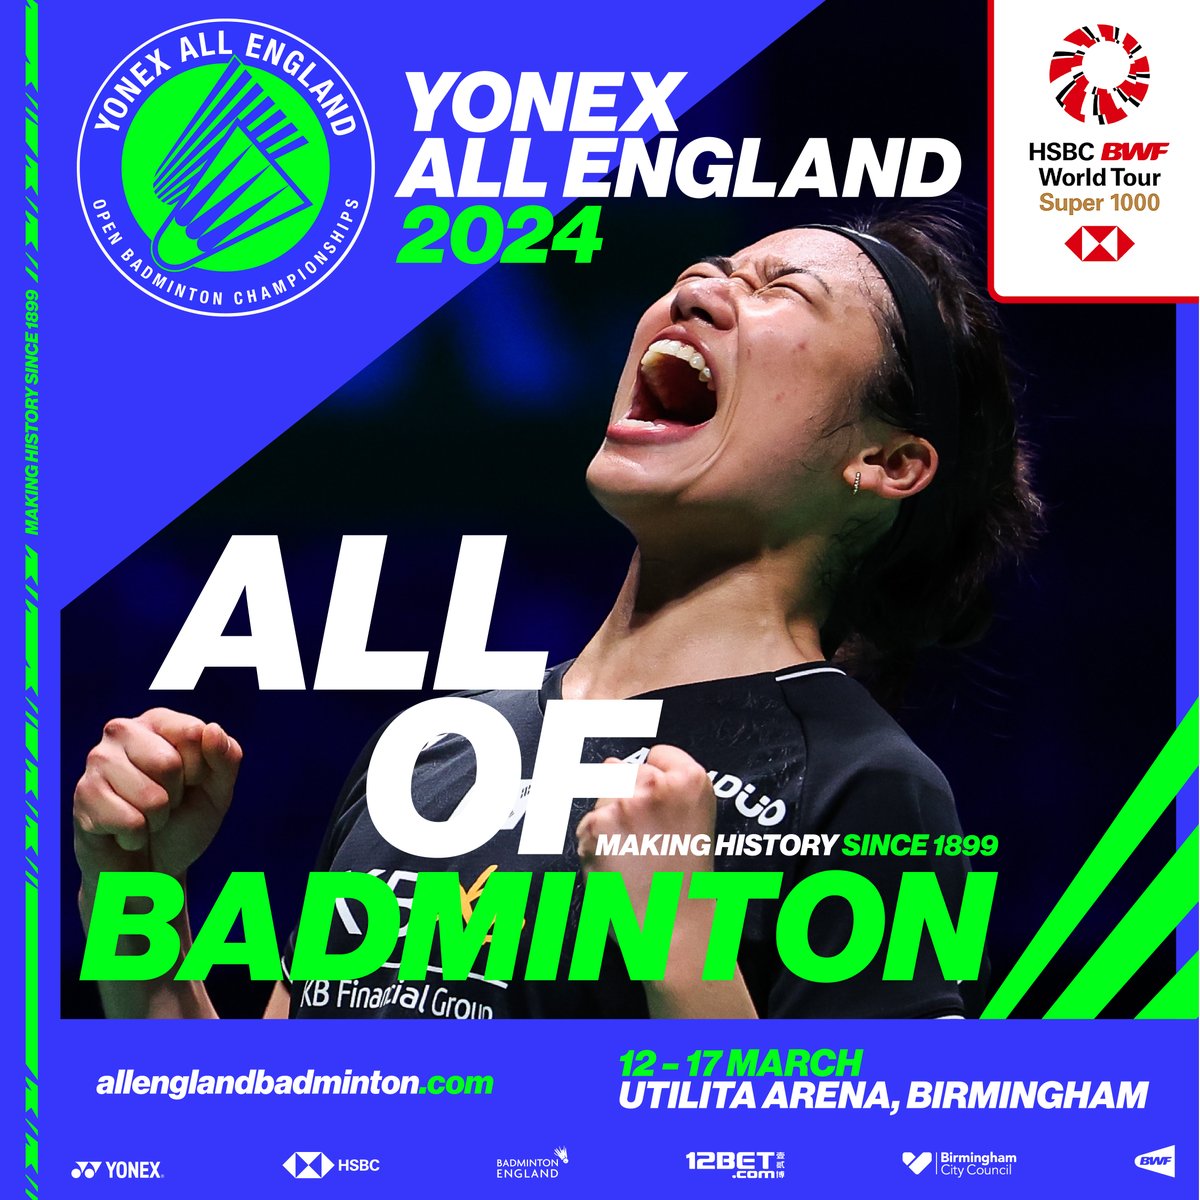 🚨 EVENT INFO 🚨 🏸 The @YonexAllEngland Open Badminton Championships has officially begun! All event details including performance times and our bag policy can be found on our website 👉 bit.ly/3SsbAWA